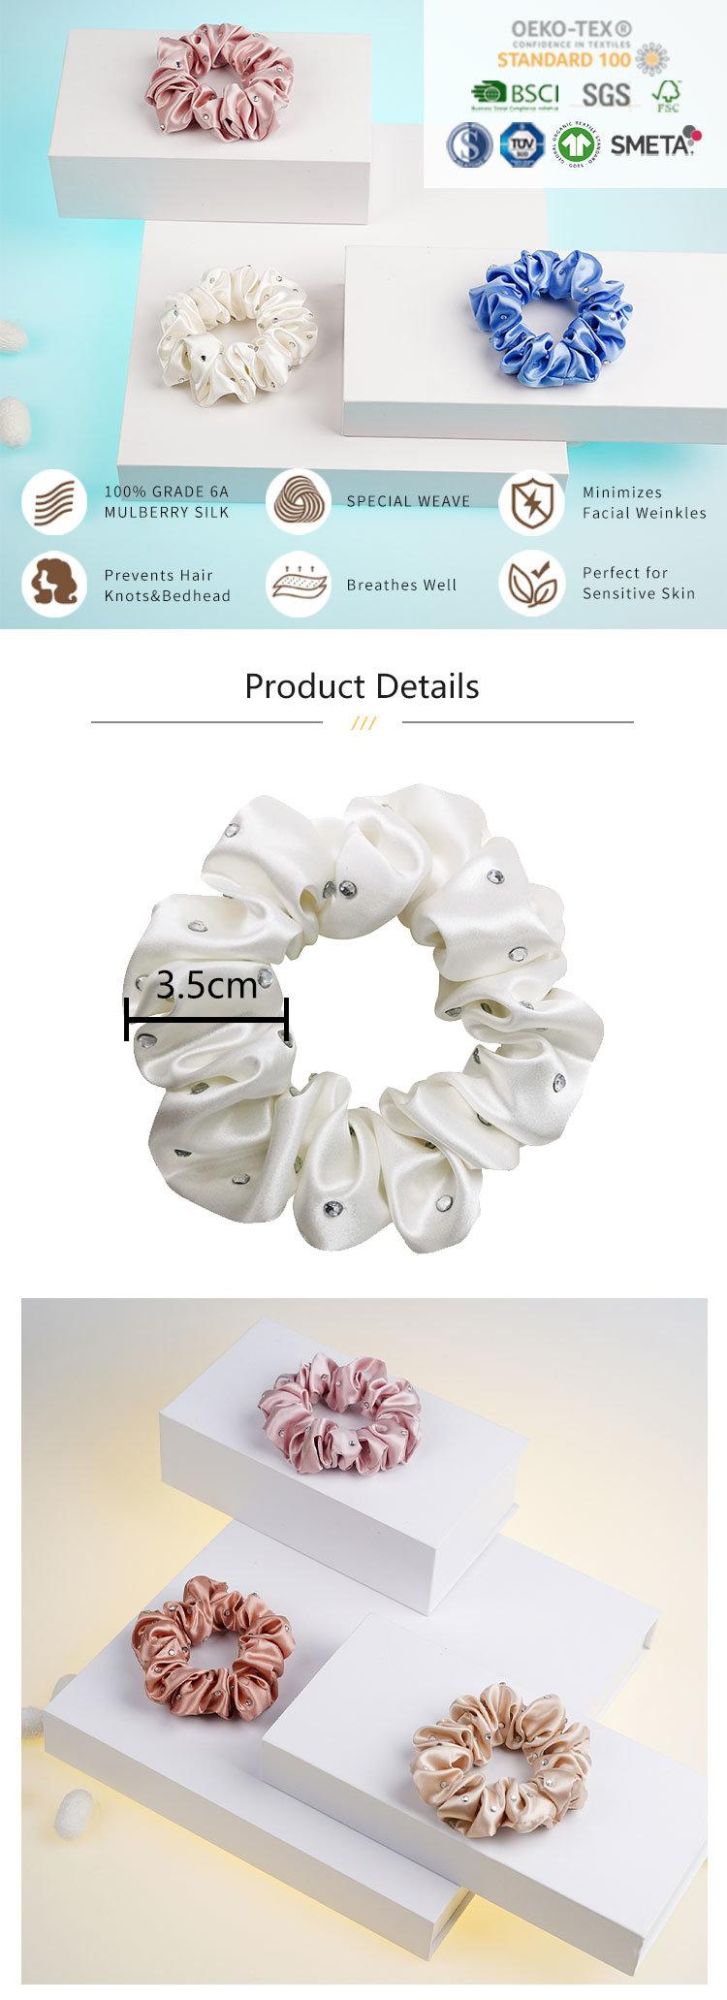 Silk Scrunchies with Mulberry Pure Silk for High Quality for Woman